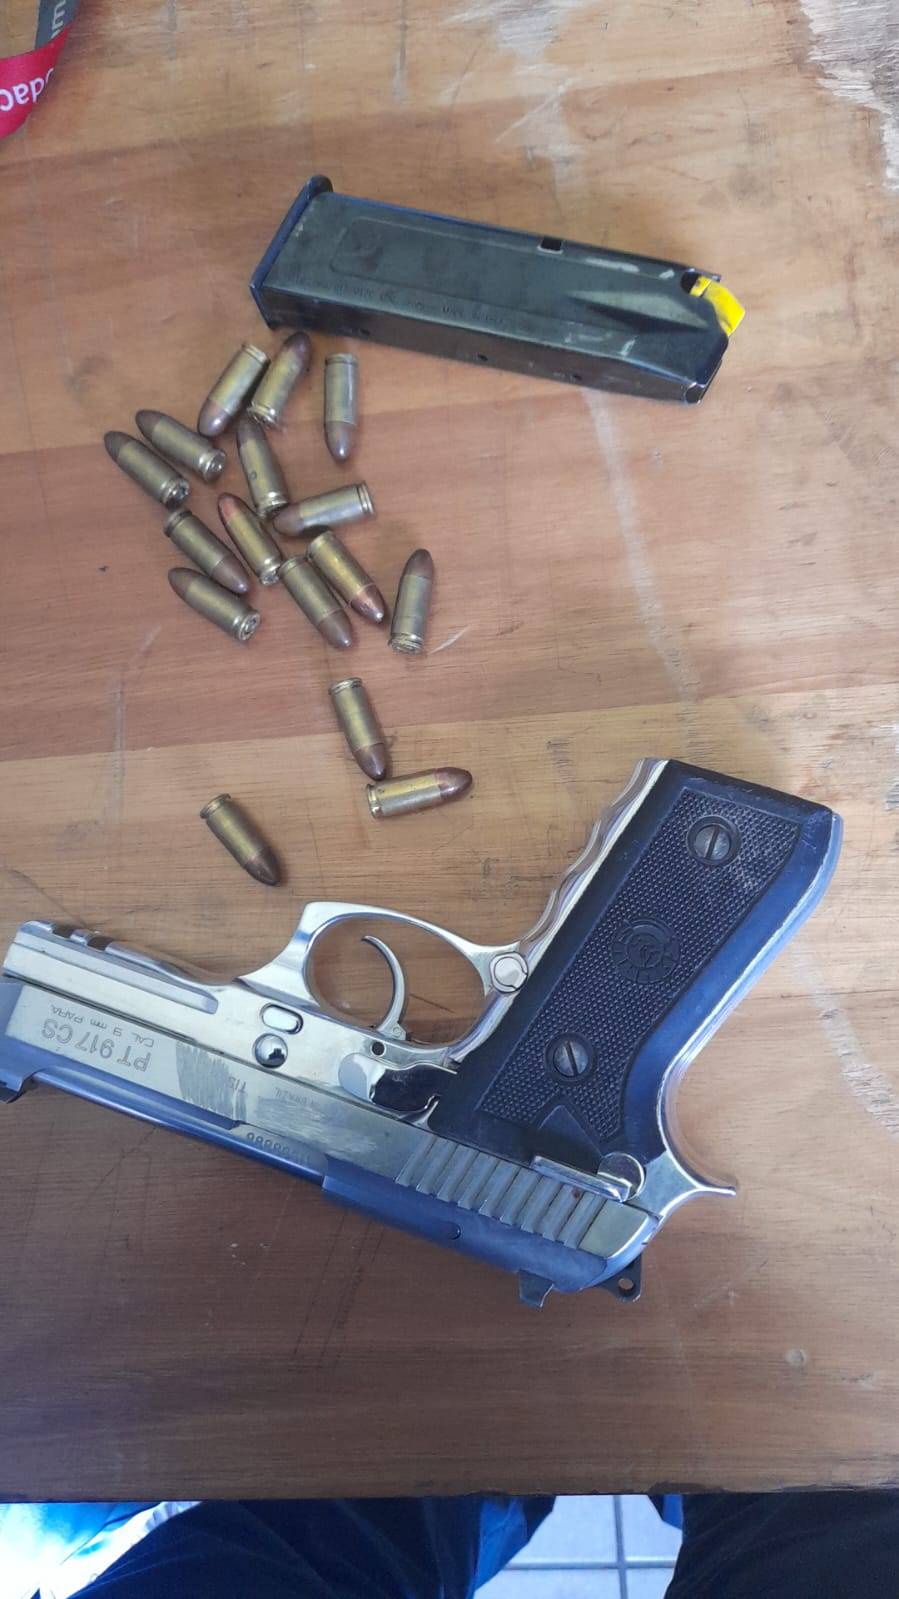 Most wanted suspect arrested with unlicensed firearm and ammunition